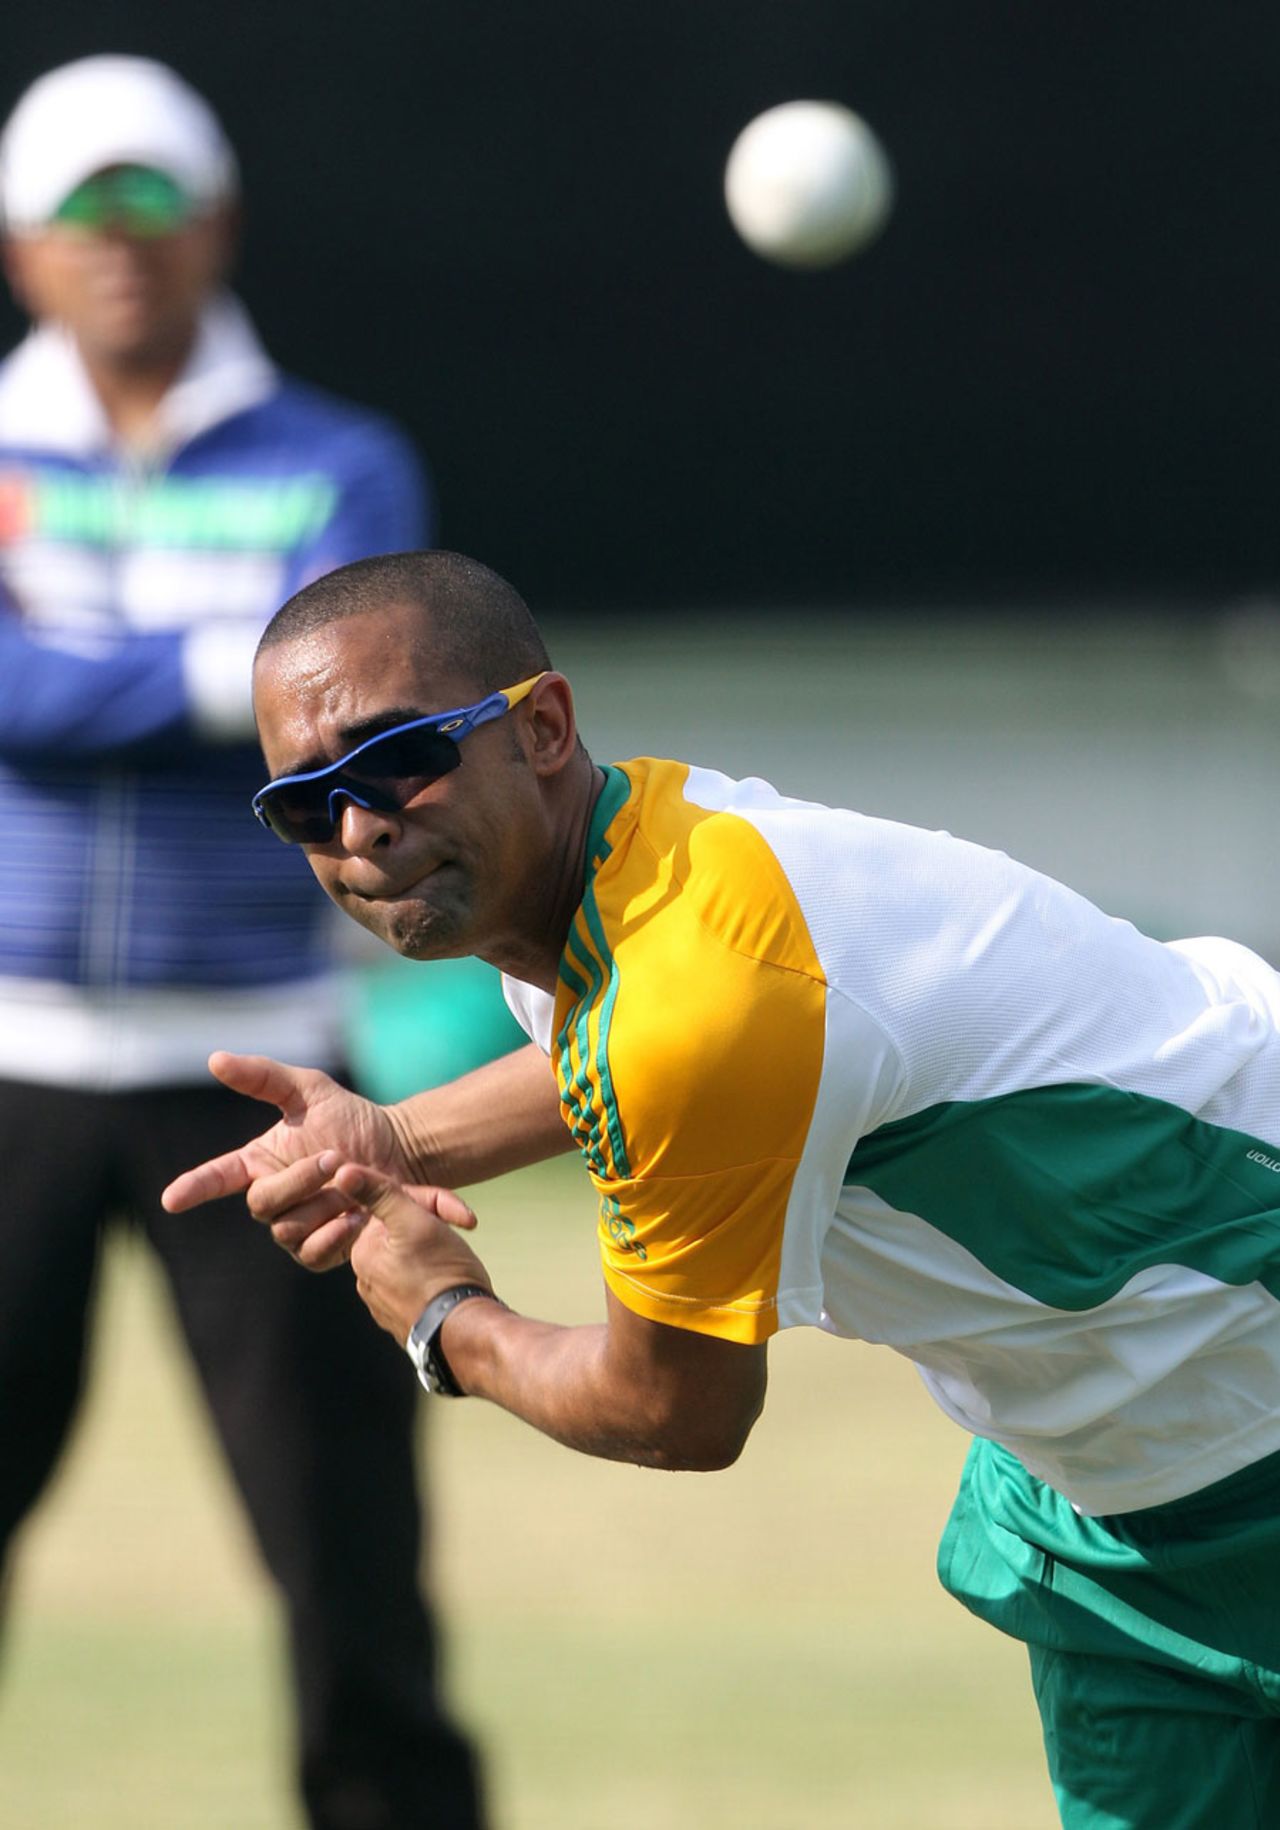 Robin Peterson bowls in practice, Cape Town, October 10, 2011